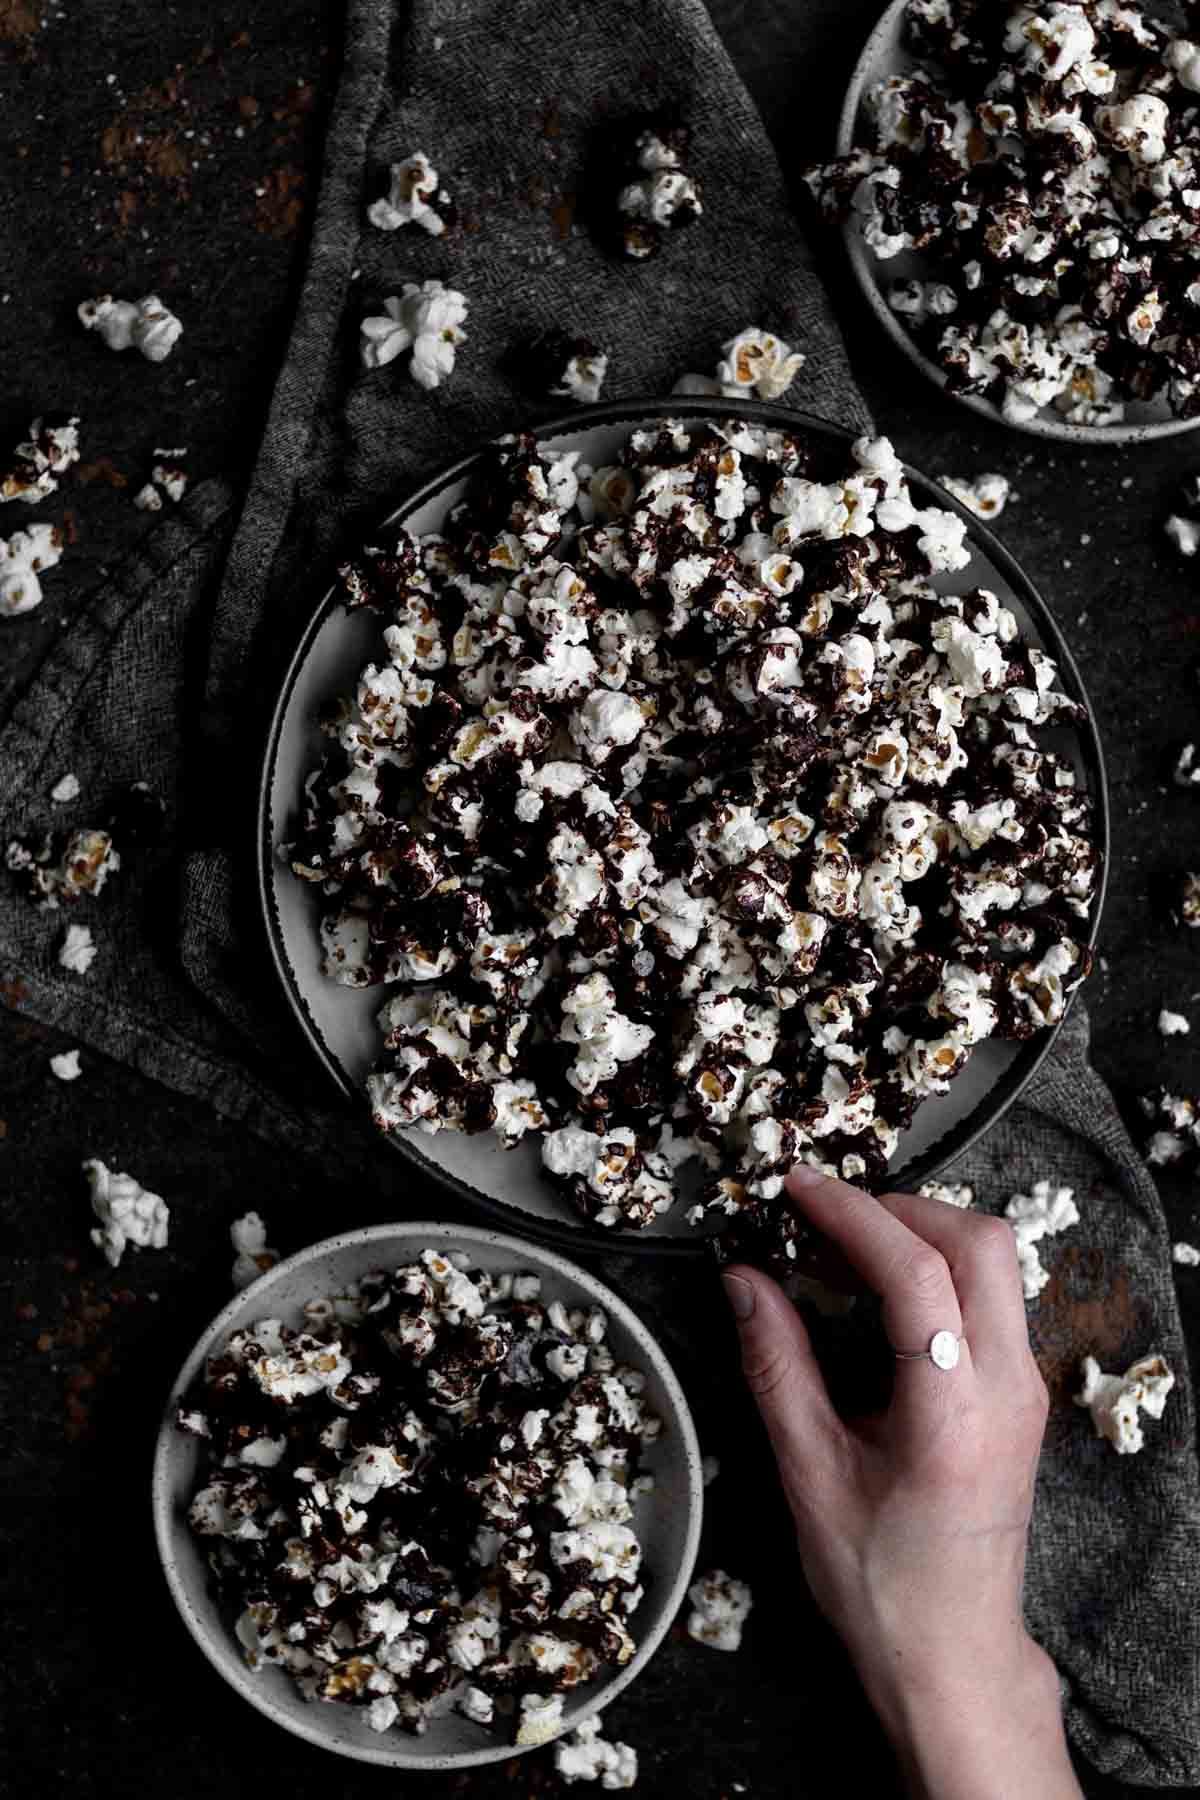 A hand picks a Chocolate Popcorn from a bowl.